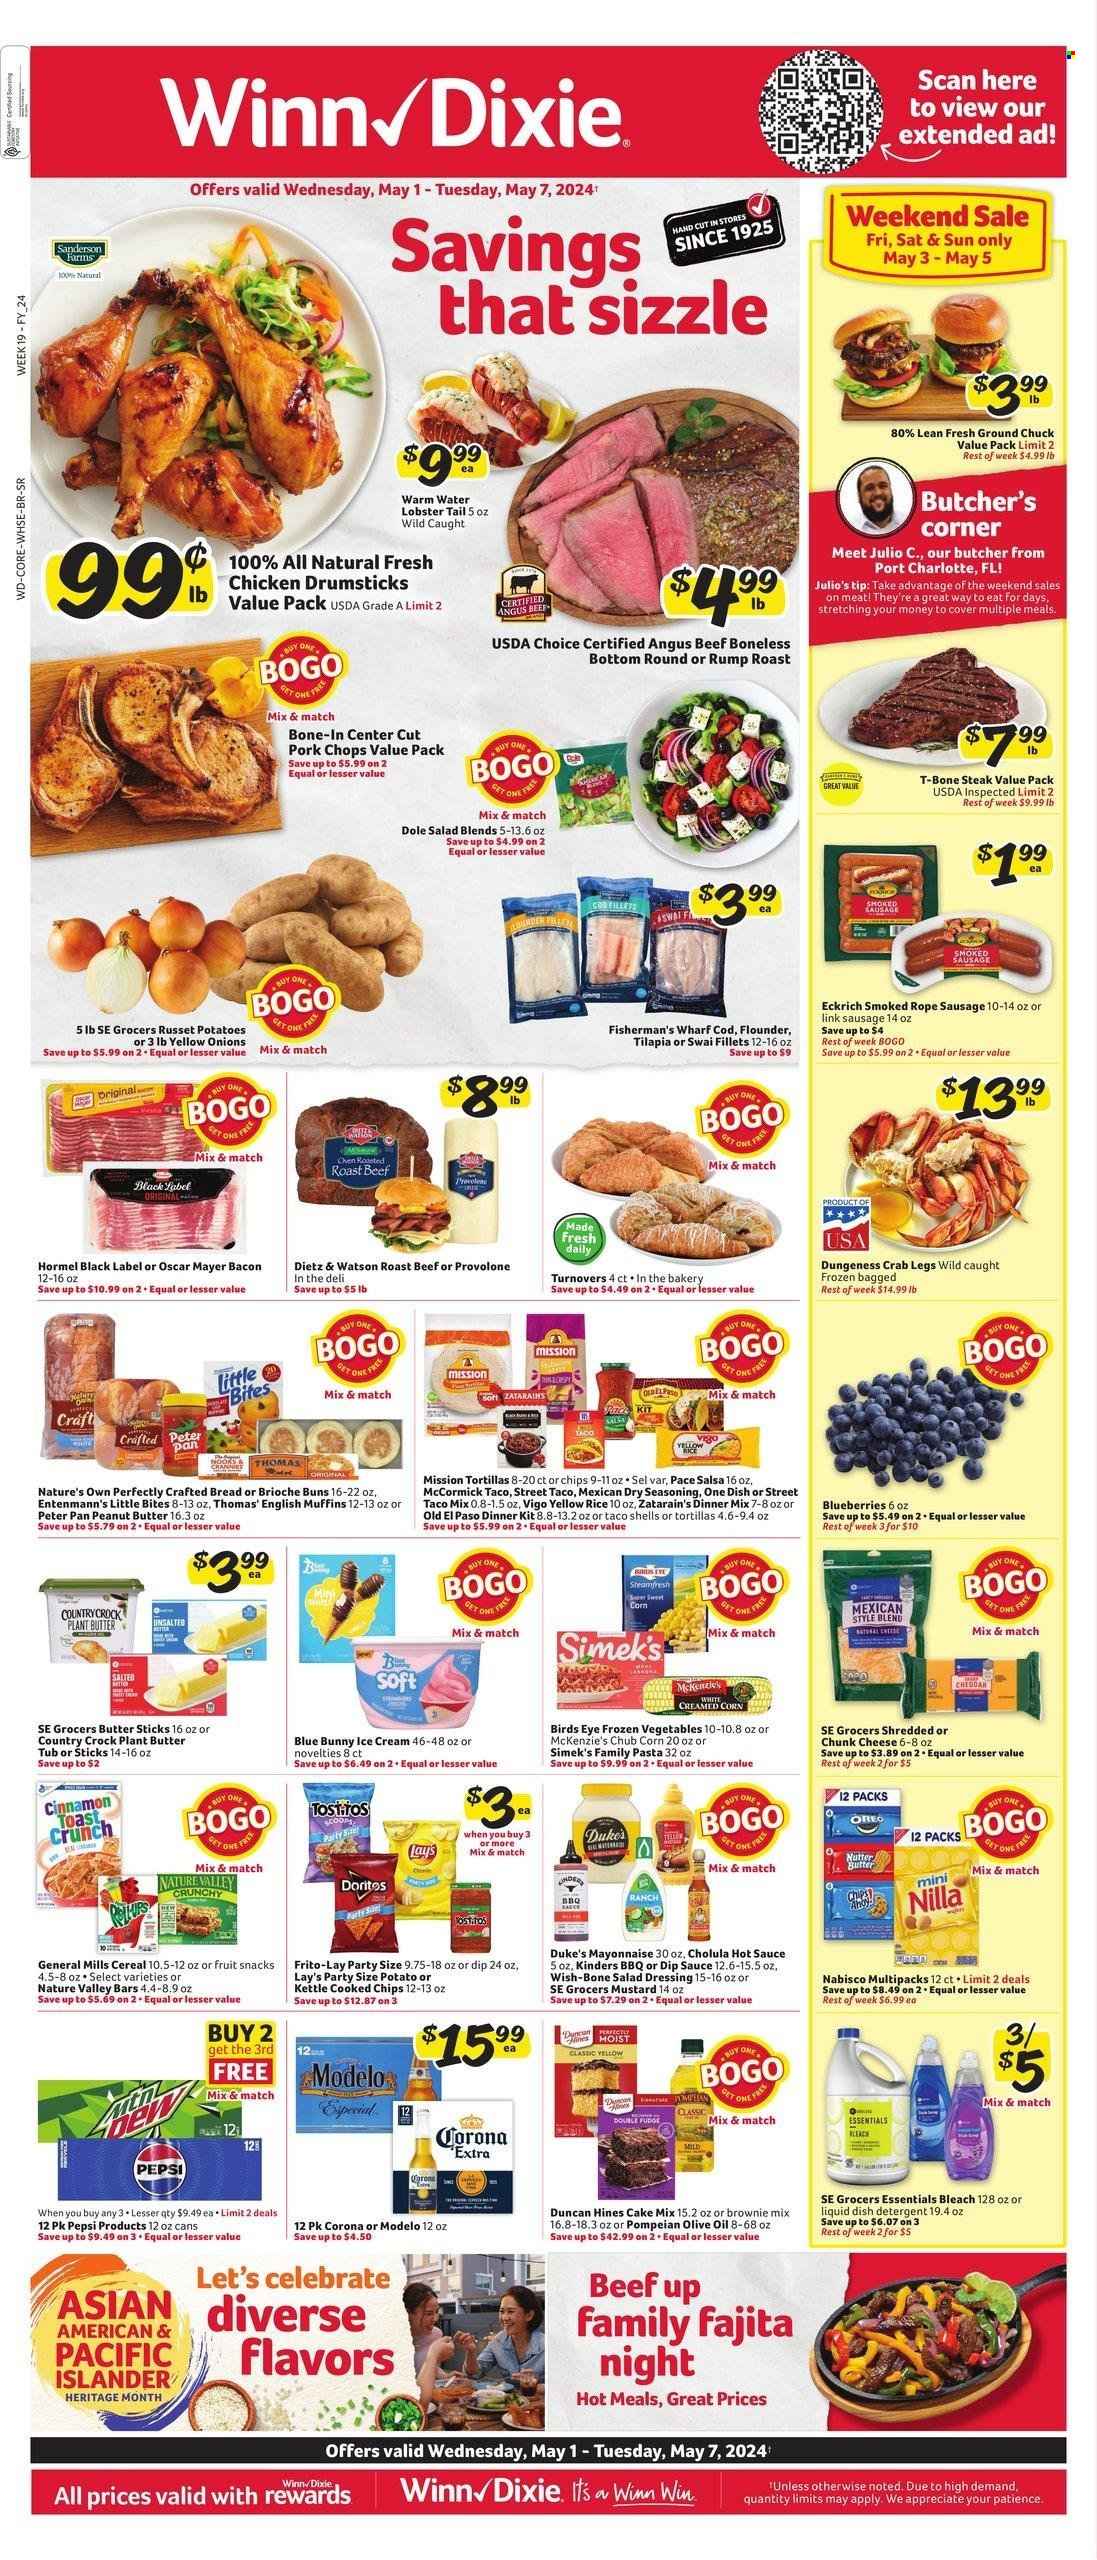 thumbnail - Winn Dixie Flyer - 05/01/2024 - 05/07/2024 - Sales products - Pepsi, soft drink, carbonated soft drink, chicken drumsticks, chicken, lobster, lobster tail, ground beef, ground chuck, beef meat, beef steak, t-bone steak, steak, Hormel, bacon, Oscar Mayer, bread, english muffins, muffin, buns, brioche, Entenmann's, Little Bites, peanut butter, Nature's Own, pork chops, pork meat, roast beef, Dietz & Watson, cheese, Provolone, seafood, crab legs, crab, beer, Corona Extra, Modelo, mayonnaise, dip, mustard, salad dressing, hot sauce, dressing, sauce, Nabisco, ice cream, Blue Bunny, potato chips, chips, Lay’s, Frito-Lay, salty snack, brownie mix, cake mix, baking mix, olive oil, oil, snack, snack bar, cereal bar, fruit snack, General Mills, bars, cereals, Nature Valley, roast, salad greens, salad, Dole, blueberries, russet potatoes, potatoes, onion, sausage, smoked sausage, rope sausage, turnovers, tortillas, Old El Paso, dinner kit, ready meal, rice, spice, seasoning, salsa, butter, cod, fish fillets, flounder, tilapia, swai fillet, shredded cheese, chunk cheese, bleach, corn, pasta, Bird's Eye, frozen vegetables. Page 1.